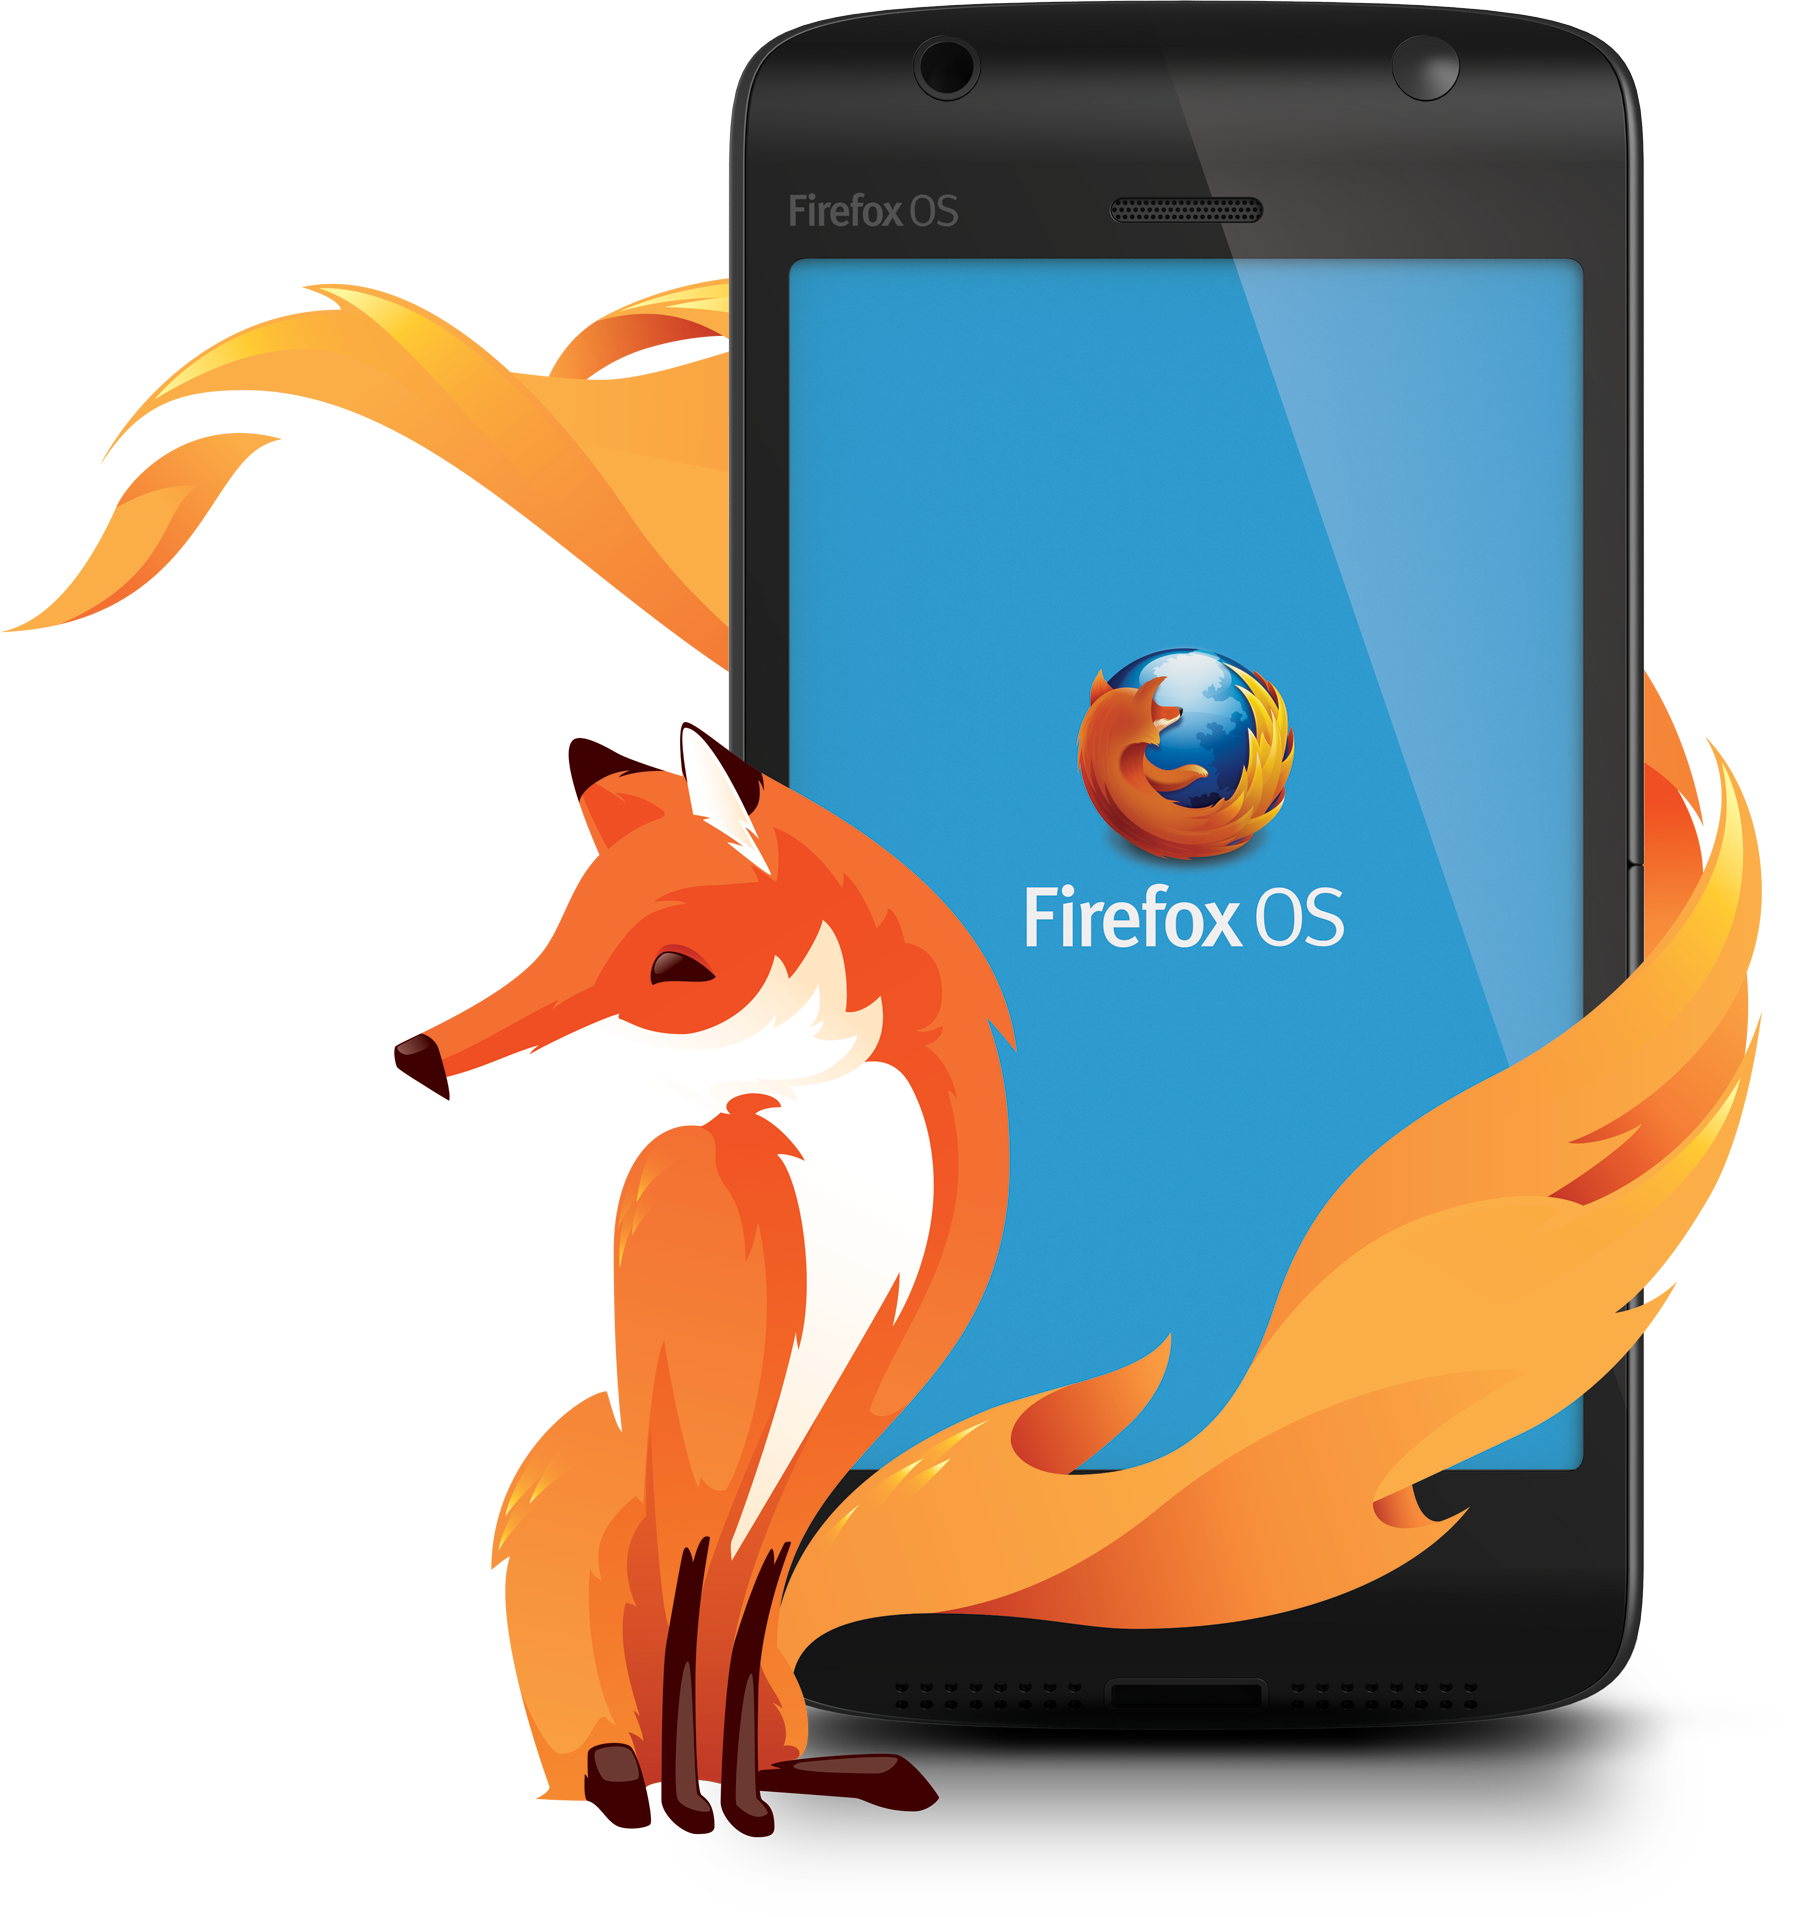 Cherry Mobile Outs Firefox OS Smartphone, Another First from a Local Smartphone Company